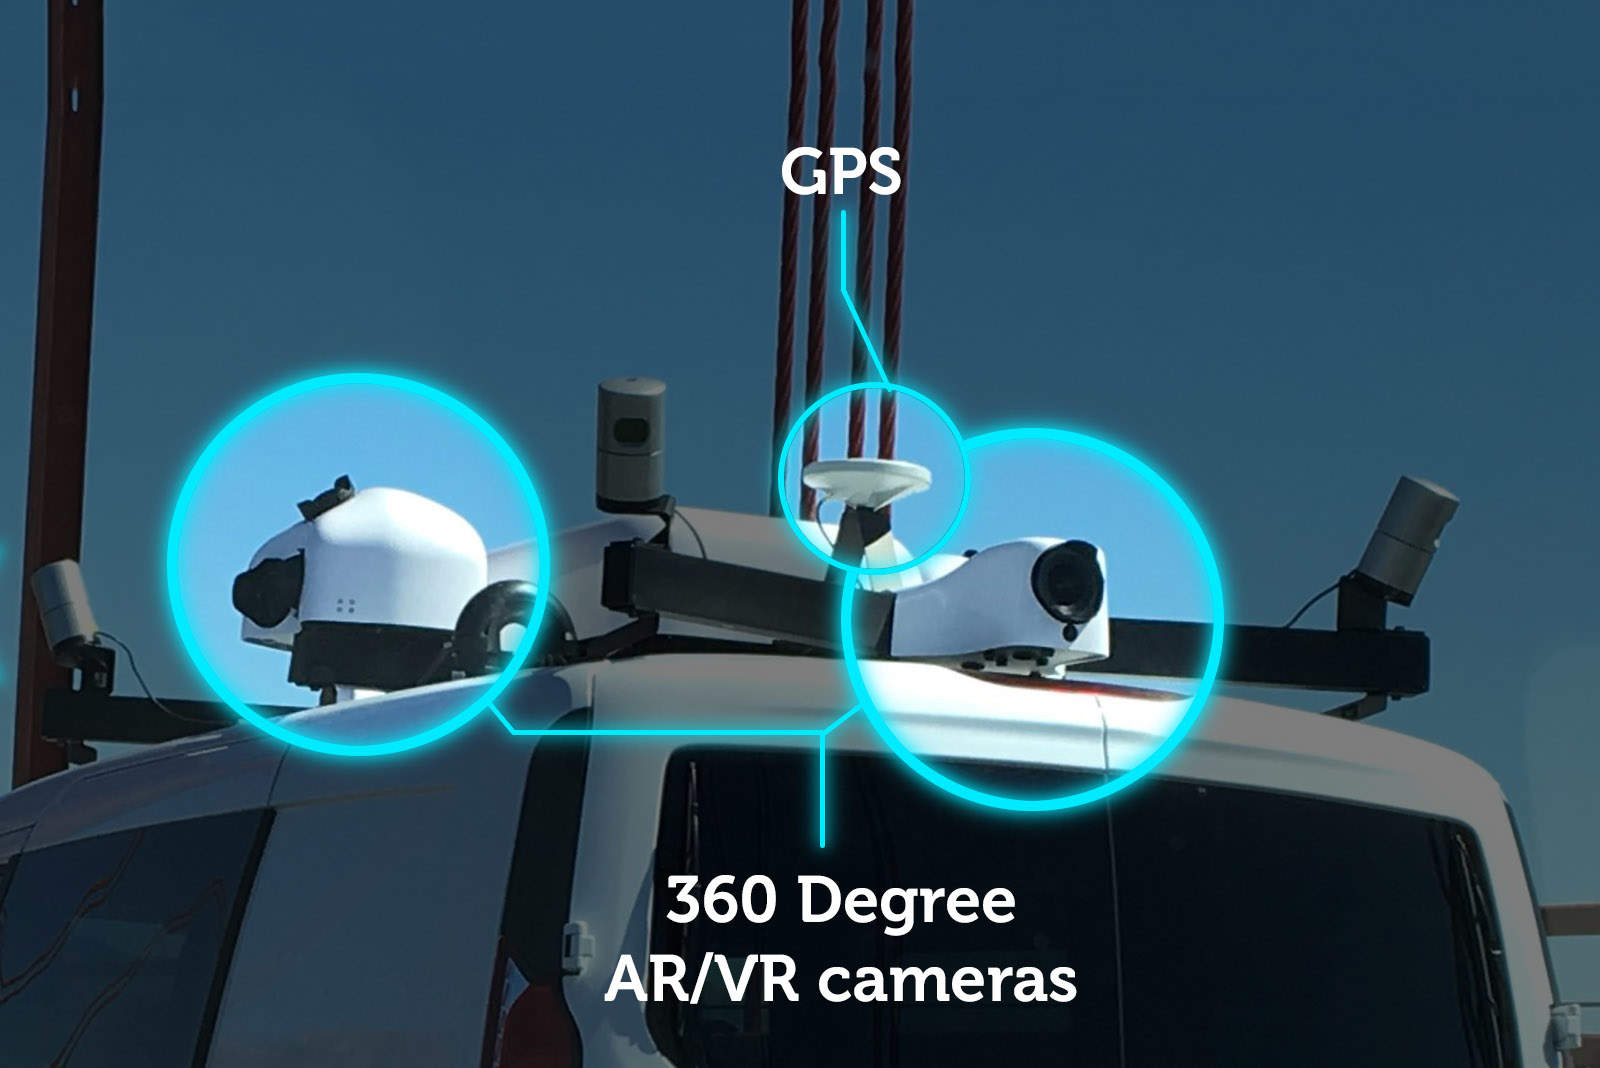 The array of cameras are capturing a 360-degree, hemispherical view of the road. Like virtual reality, the viewer will be able to look all around them and even upwards.